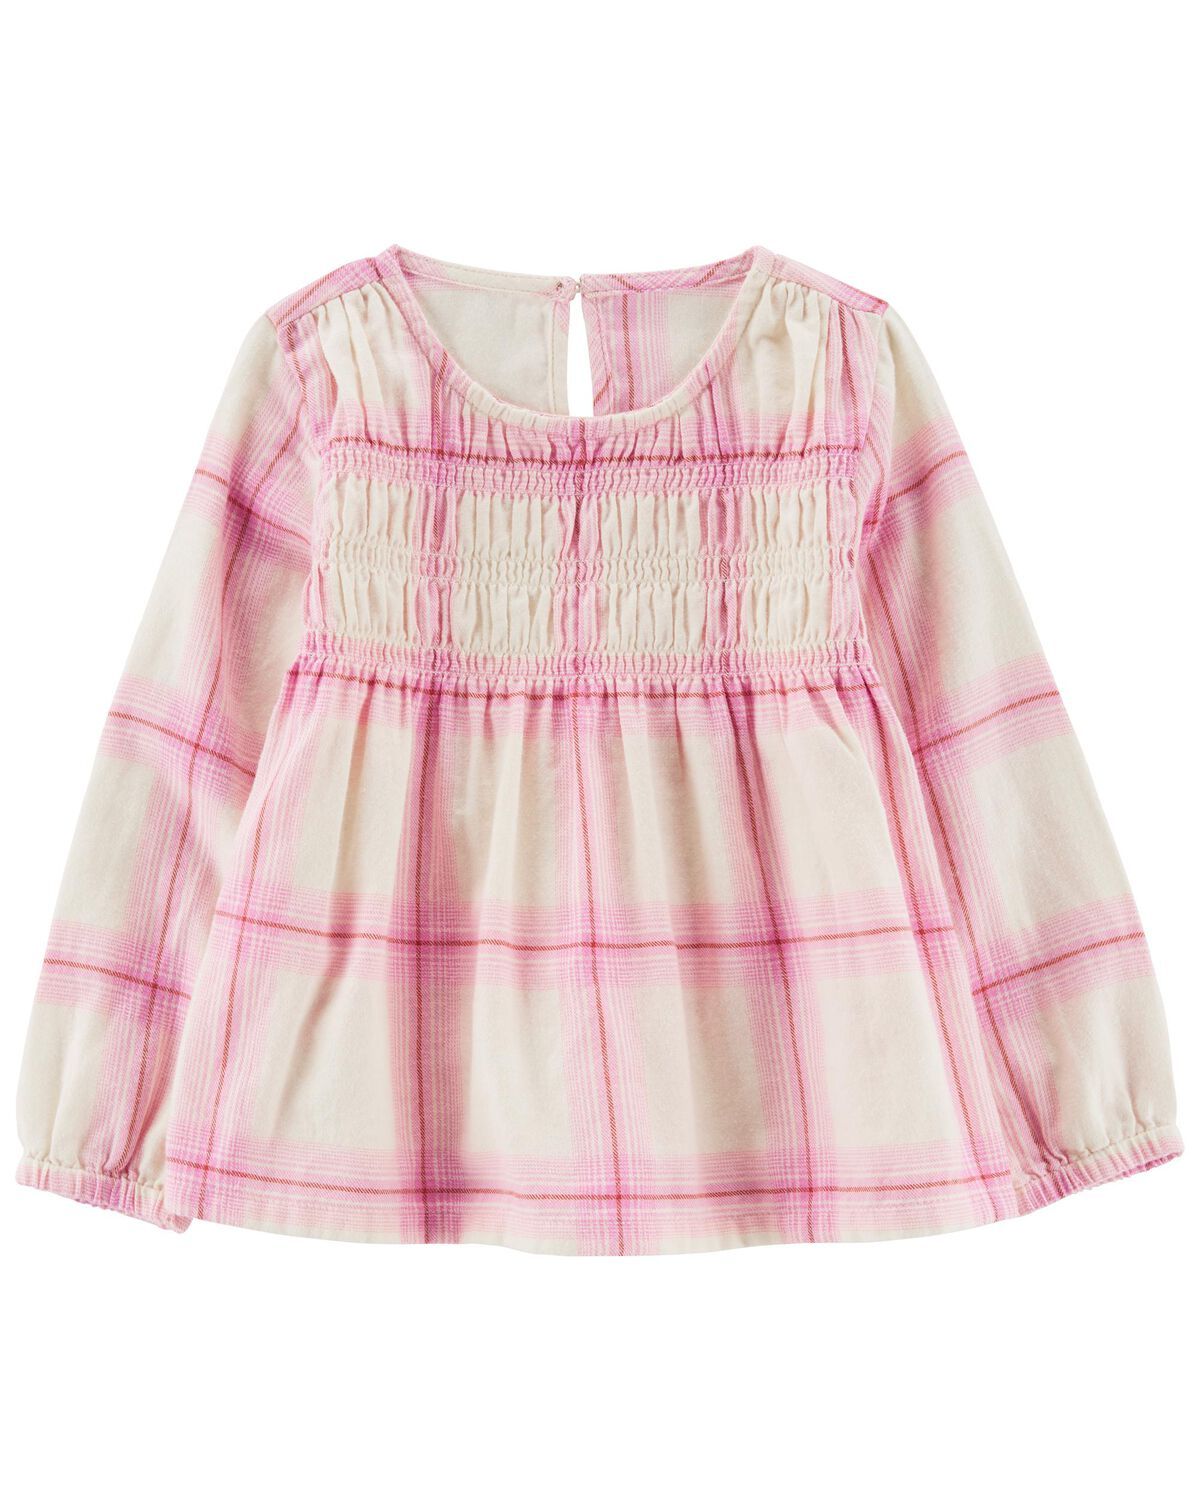 Pink/Ivory Toddler Plaid Flannel Top | carters.com | Carter's